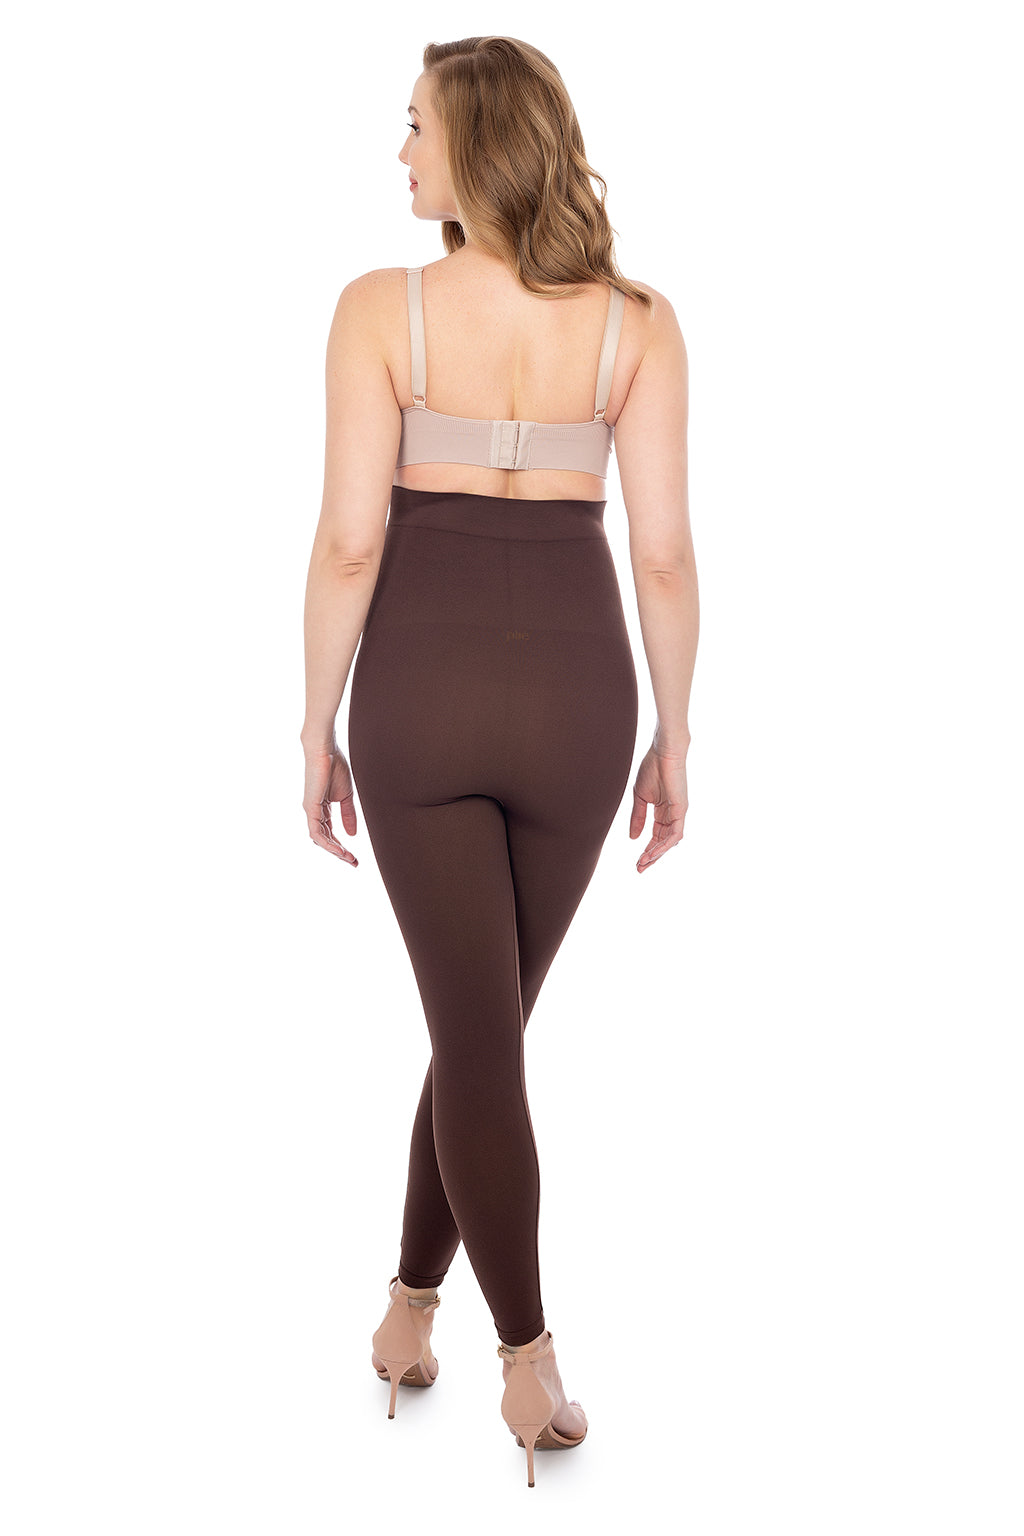 Shapermint Empetua High Waisted Shaping Leggings Black Compression